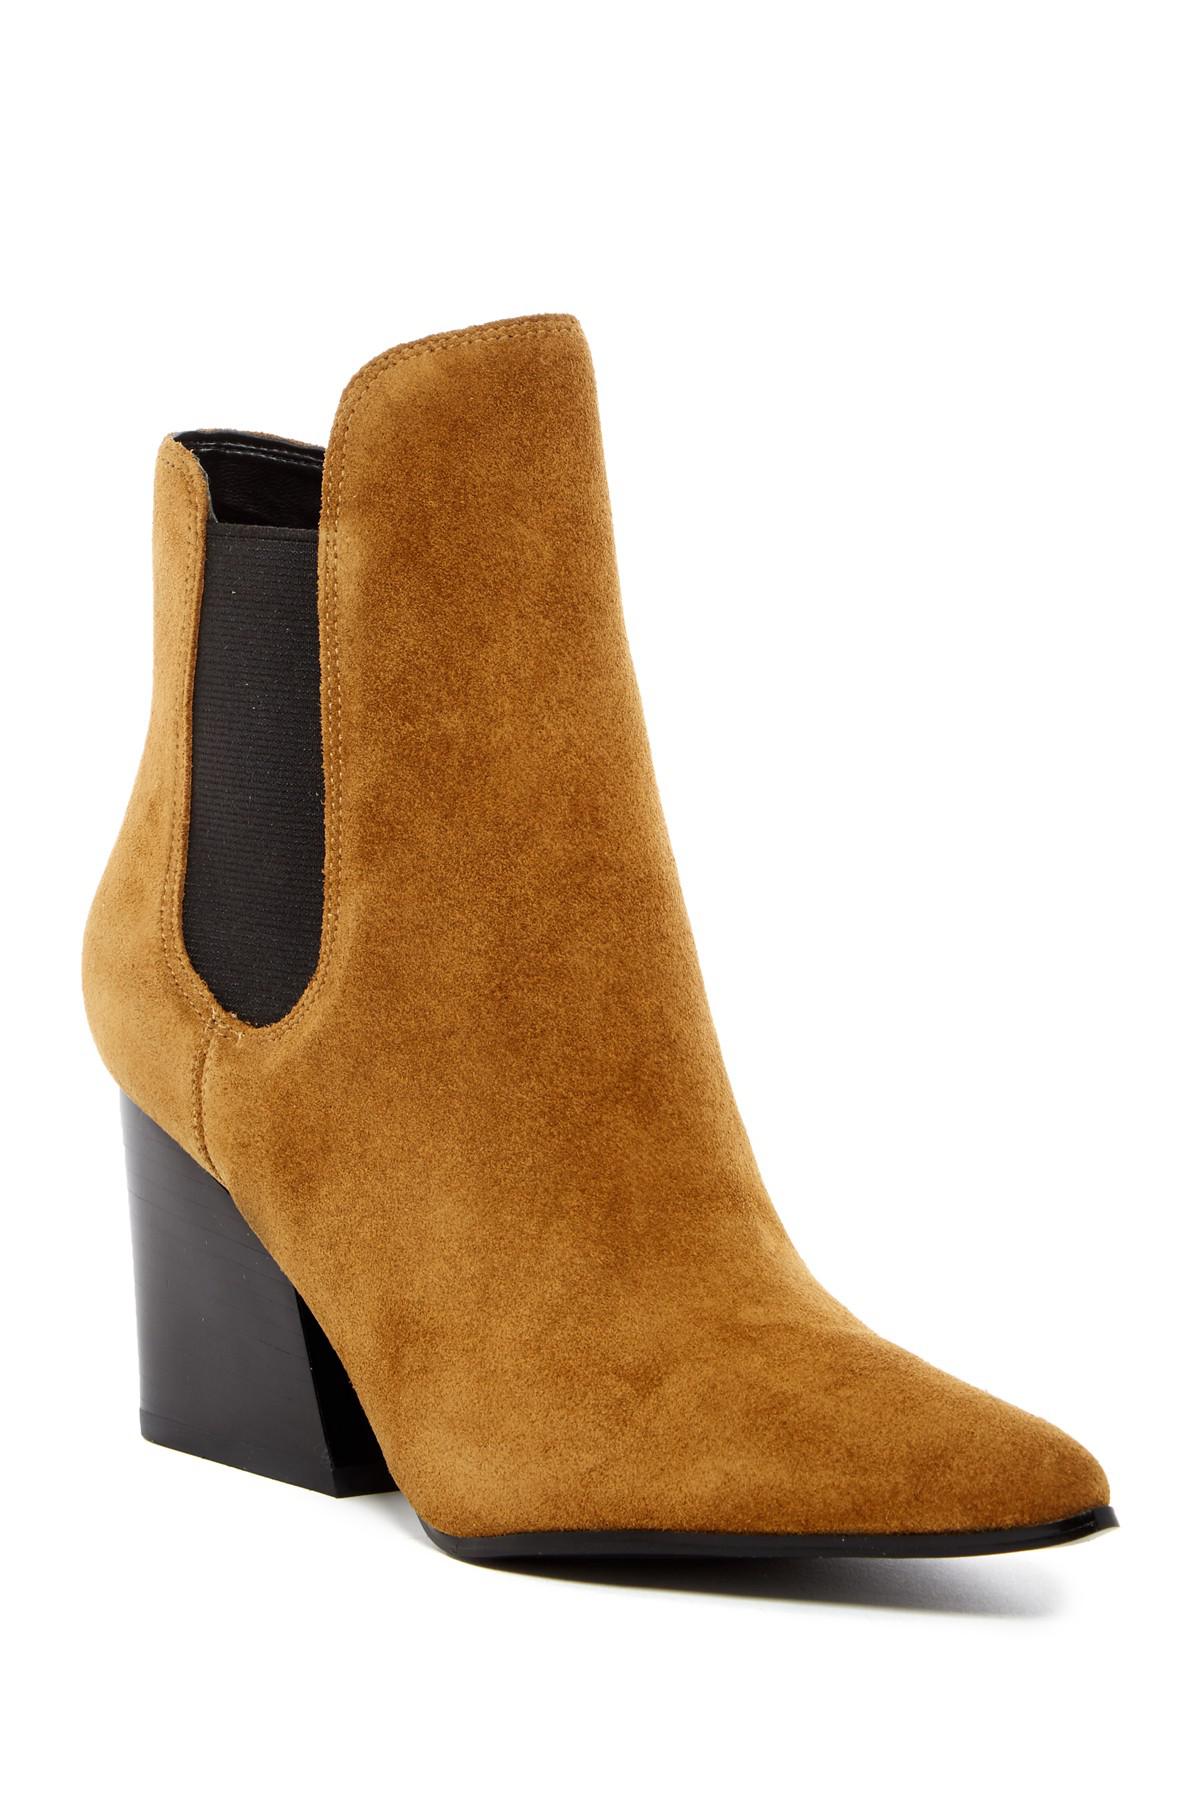 kendall and kylie finley leather boots